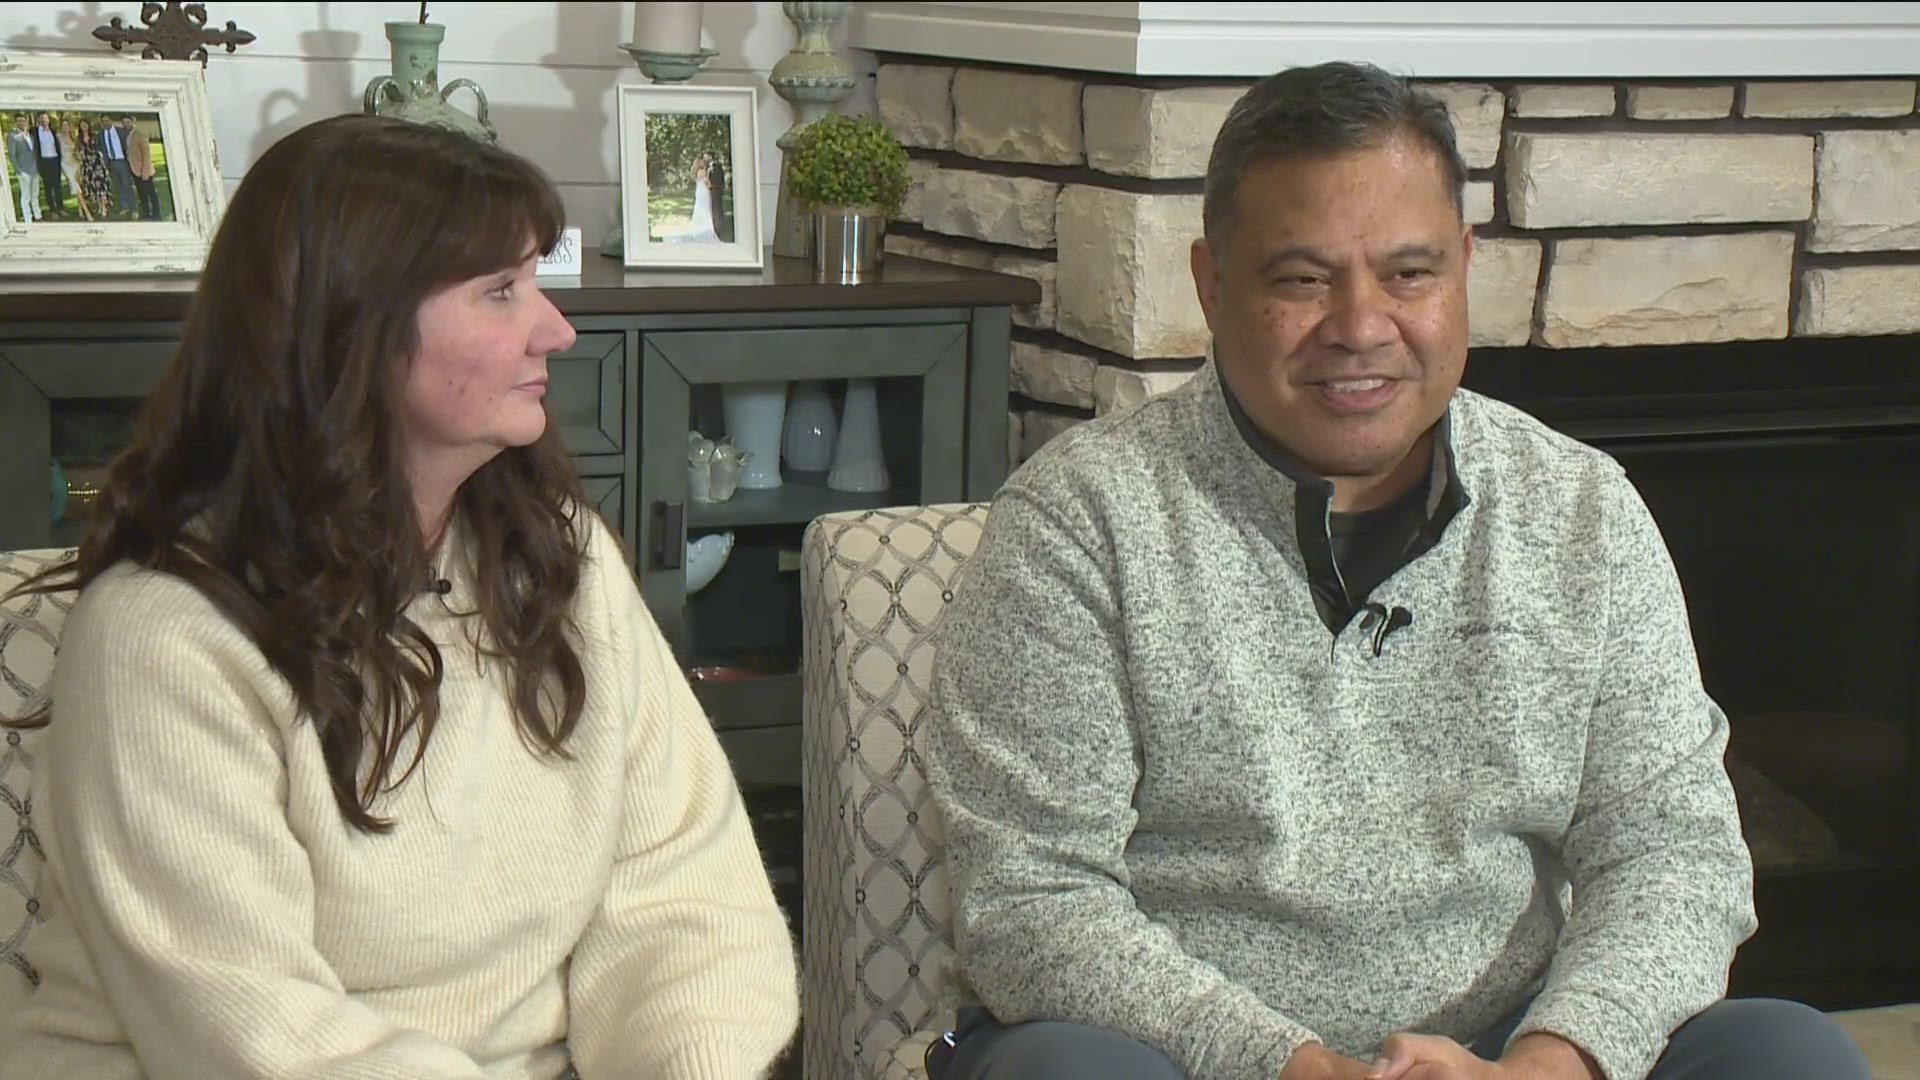 Ron Manu is among 37 million Americans living with chronic kidney disease. He didn't find out until it was almost too late.